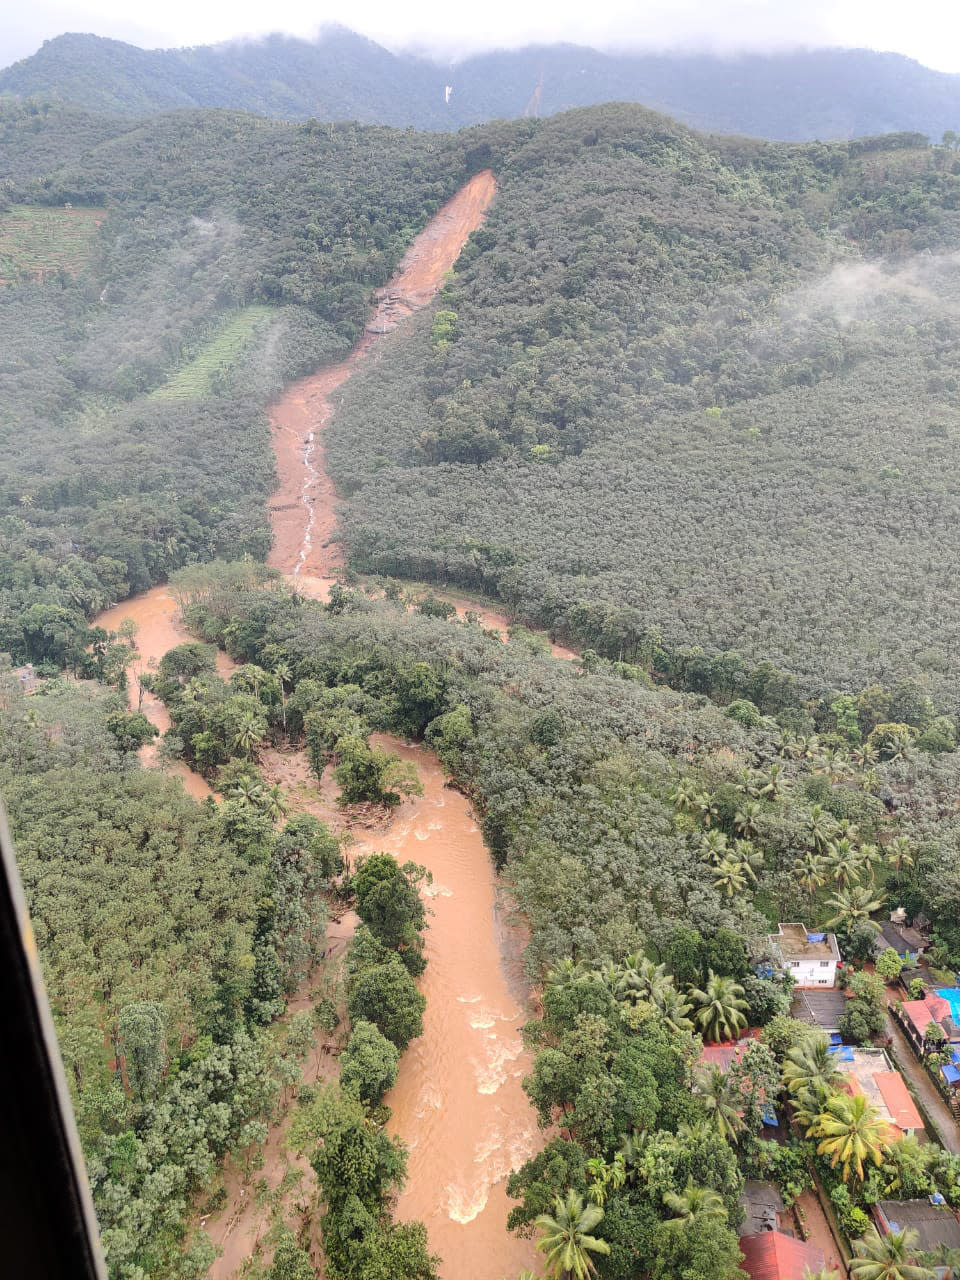 This photograph provided by the Indian Navy and taken from a naval helicopter shows the scene after a landslide triggered by heavy rains in the western ghats mountains at Koottickal in Kottayam district, southern Kerala state, India, Sunday, Oct.17, 2021. Bodies of six people have been recovered, and rescuers are searching for those feared missing. (Indian Navy via AP)